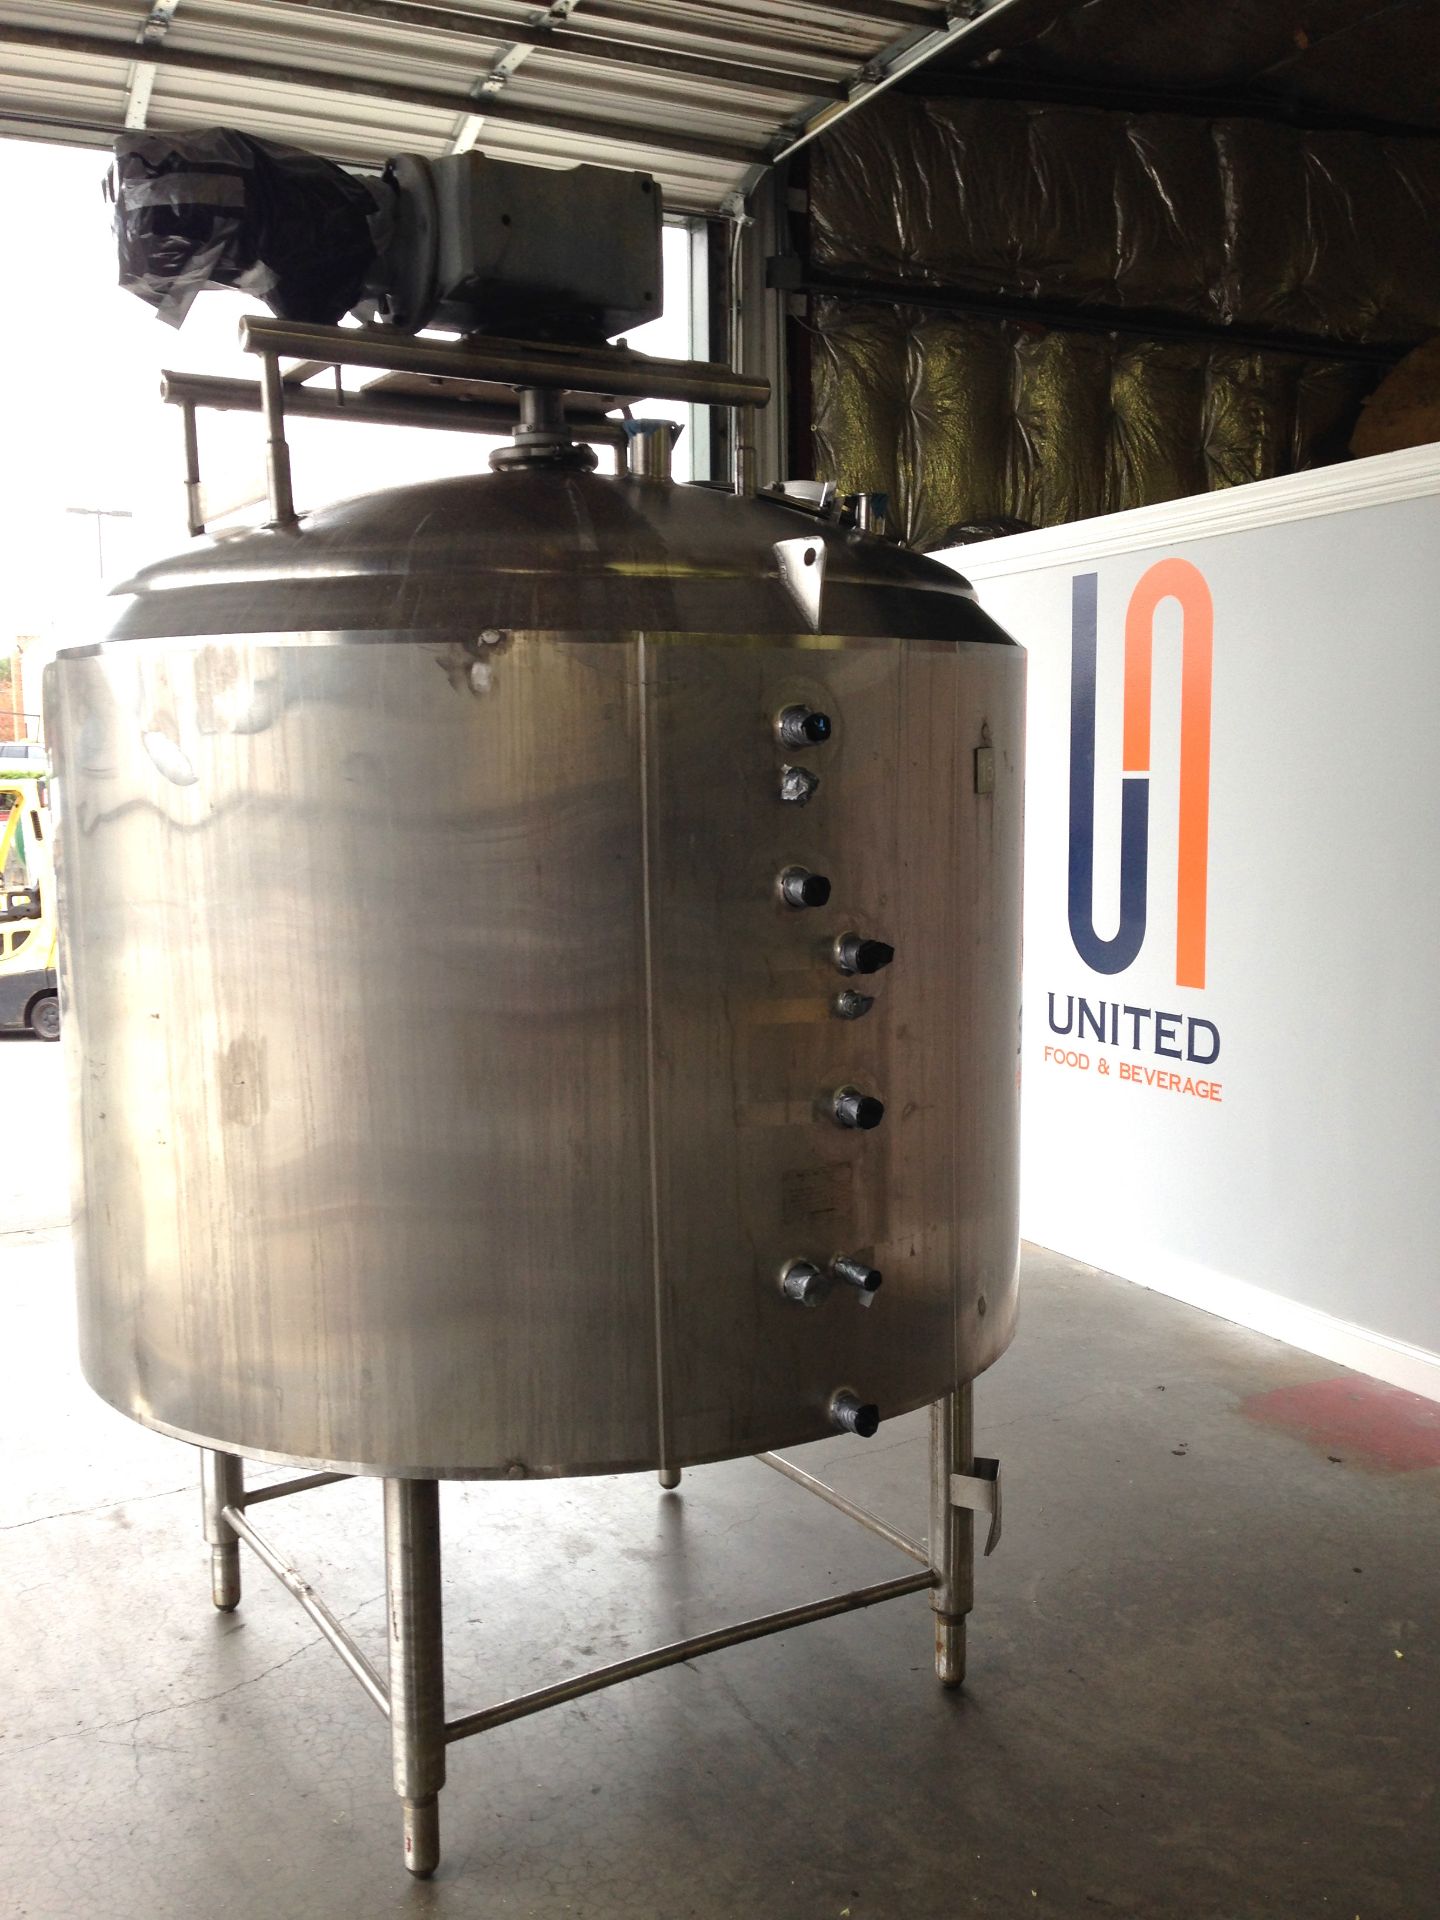 Cherry-Burrell 500 Gallon Jacketed Processor Tank Serial: E-313-90 Year: 1990316L Stainless Steel